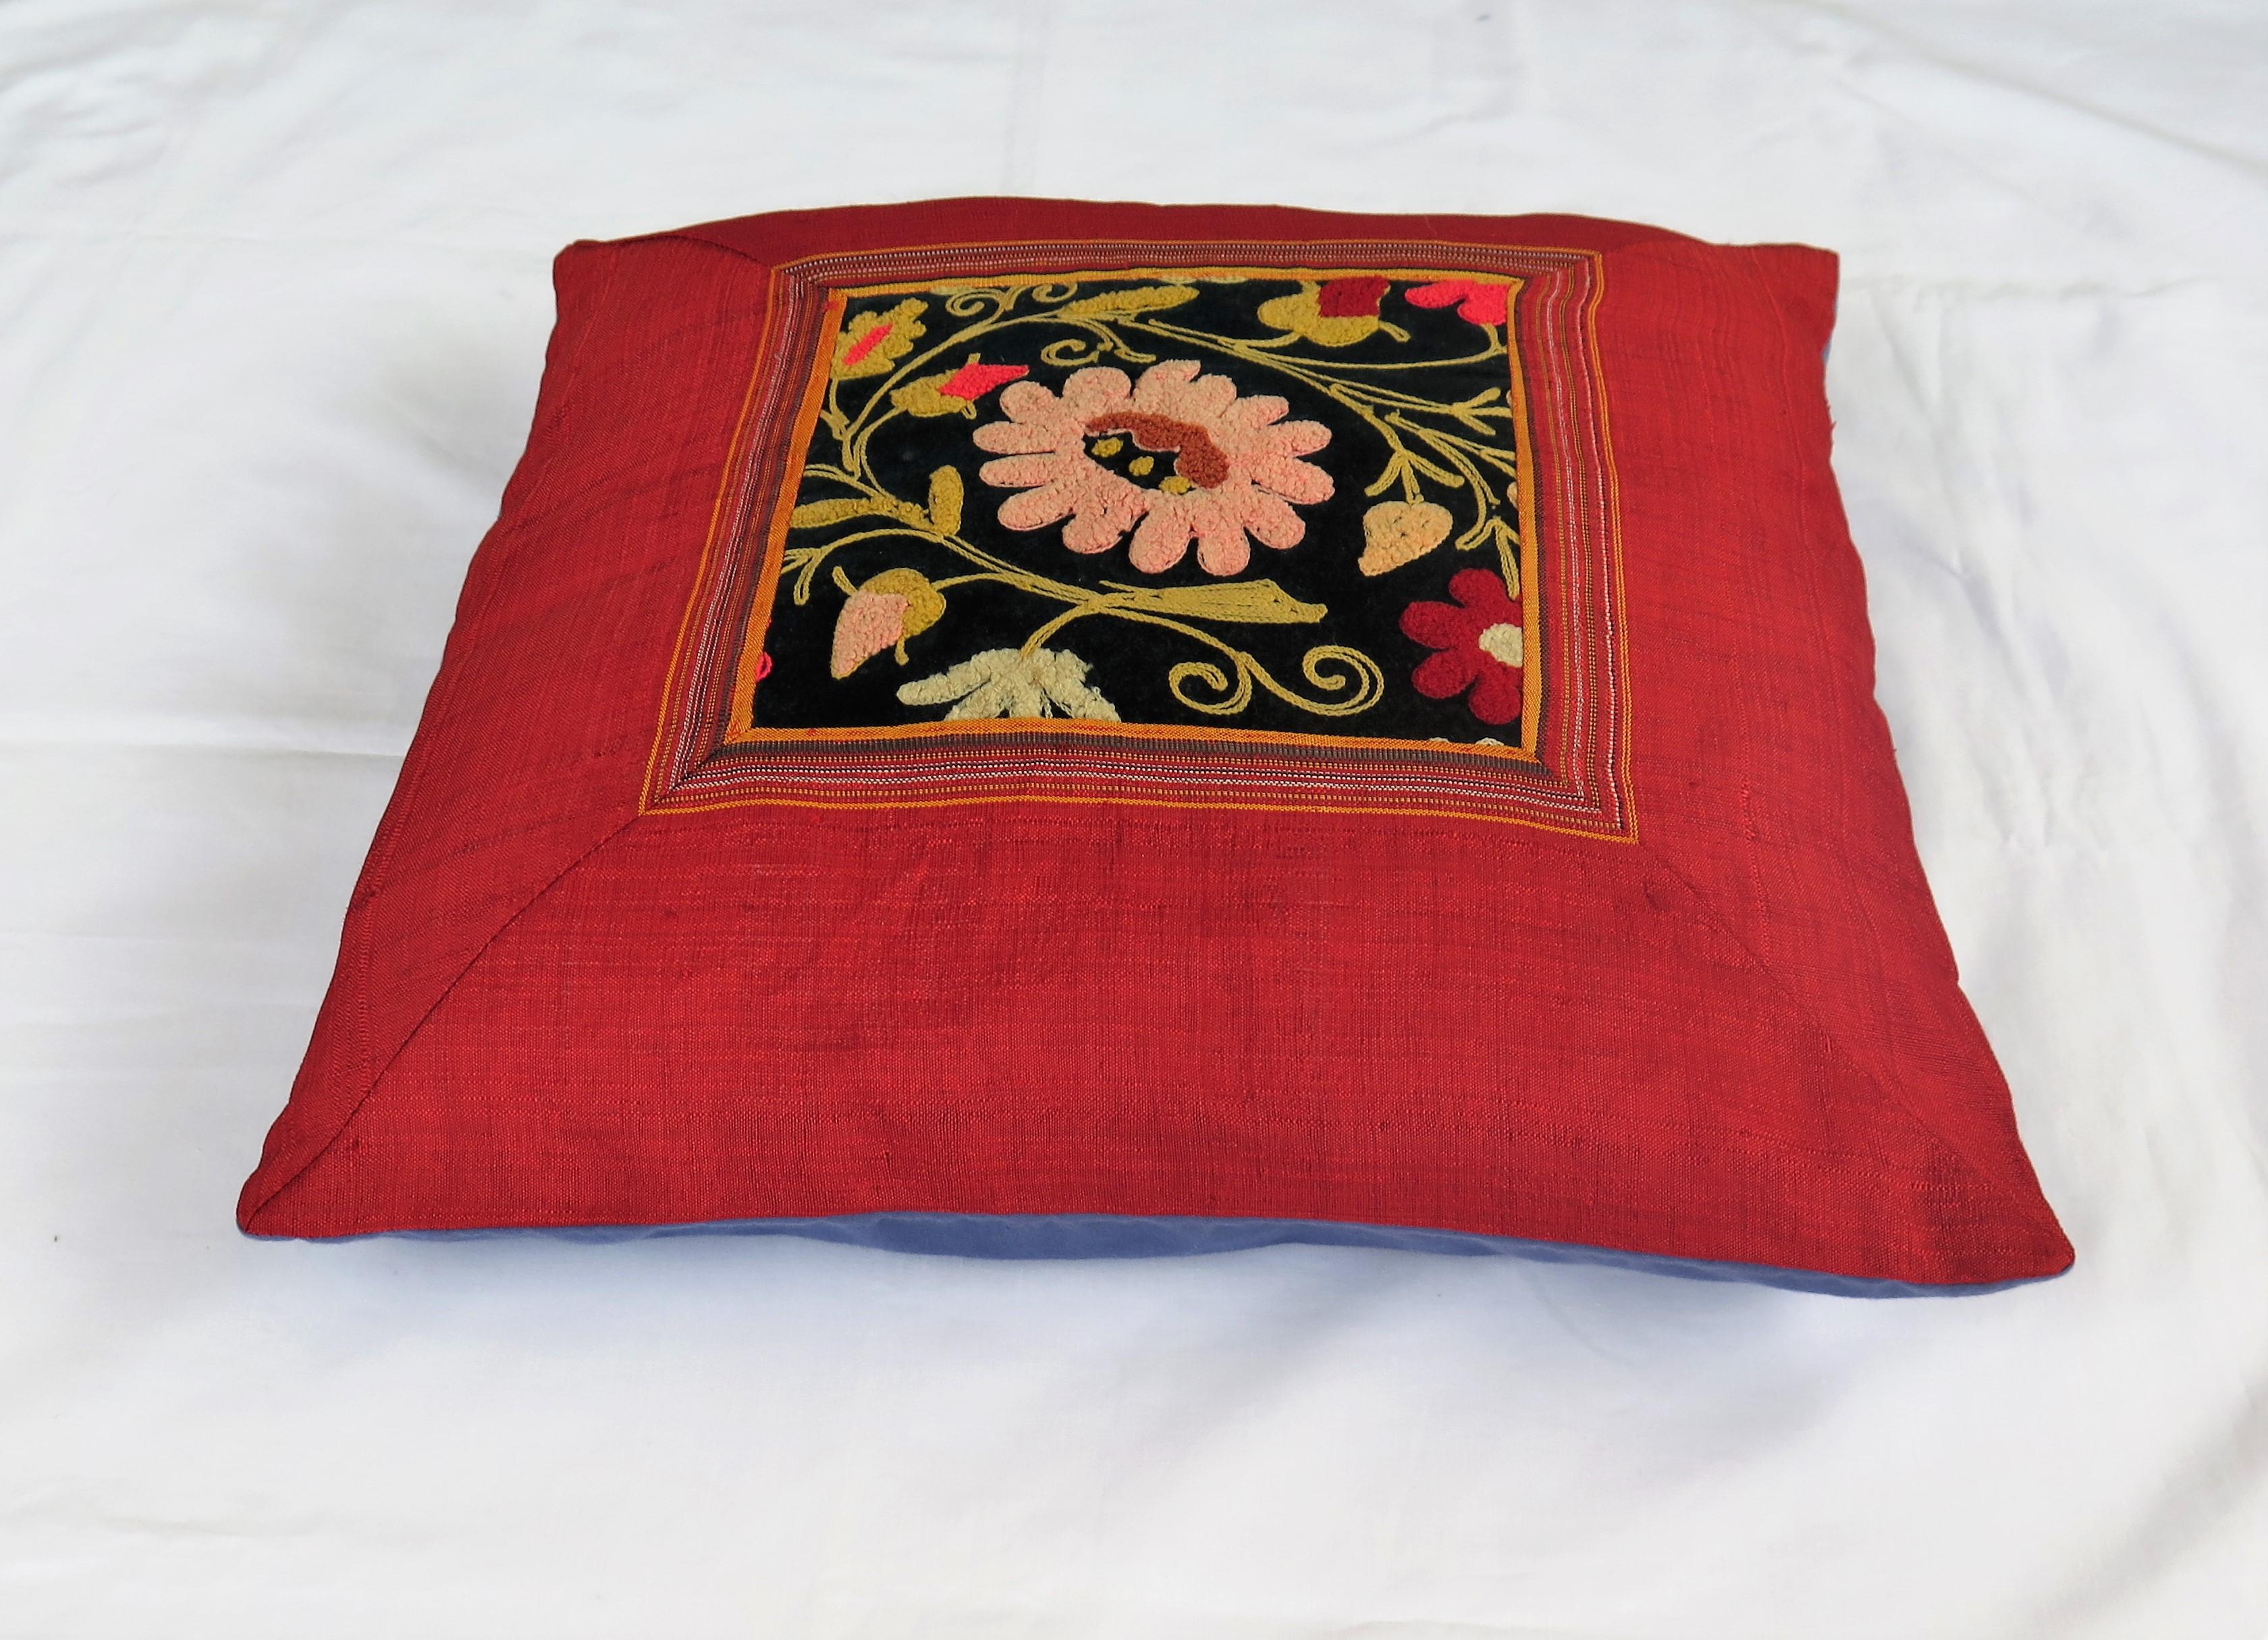 20th Century Art Nouveau Cushion or Pillow hand Embroidered, Circa 1900 For Sale